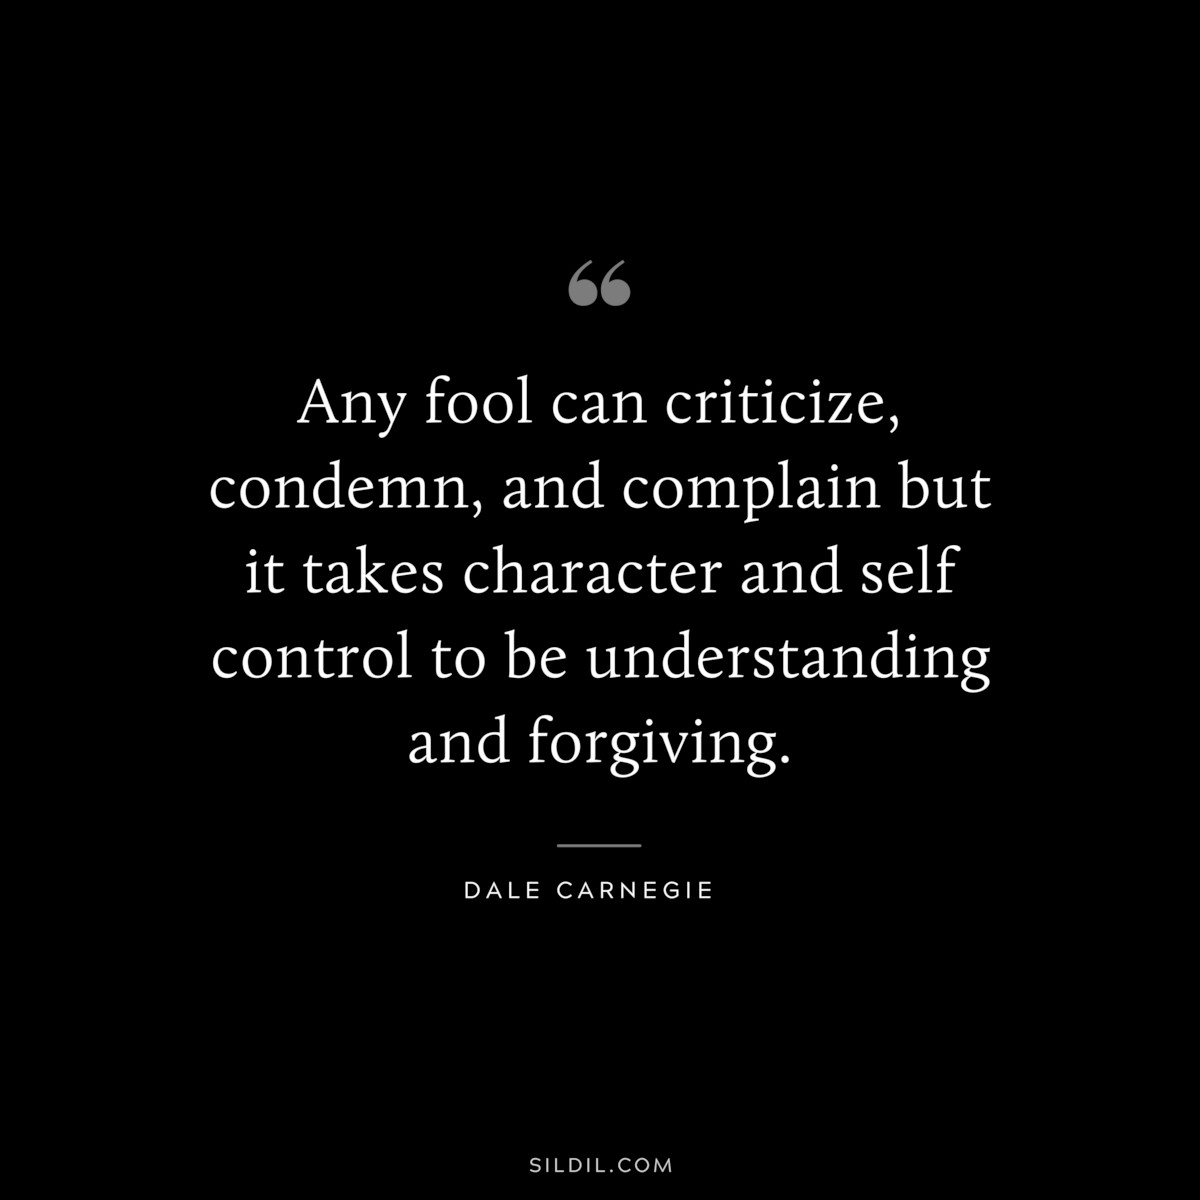 Any fool can criticize, condemn, and complain but it takes character and self control to be understanding and forgiving.― Dale Carnegie